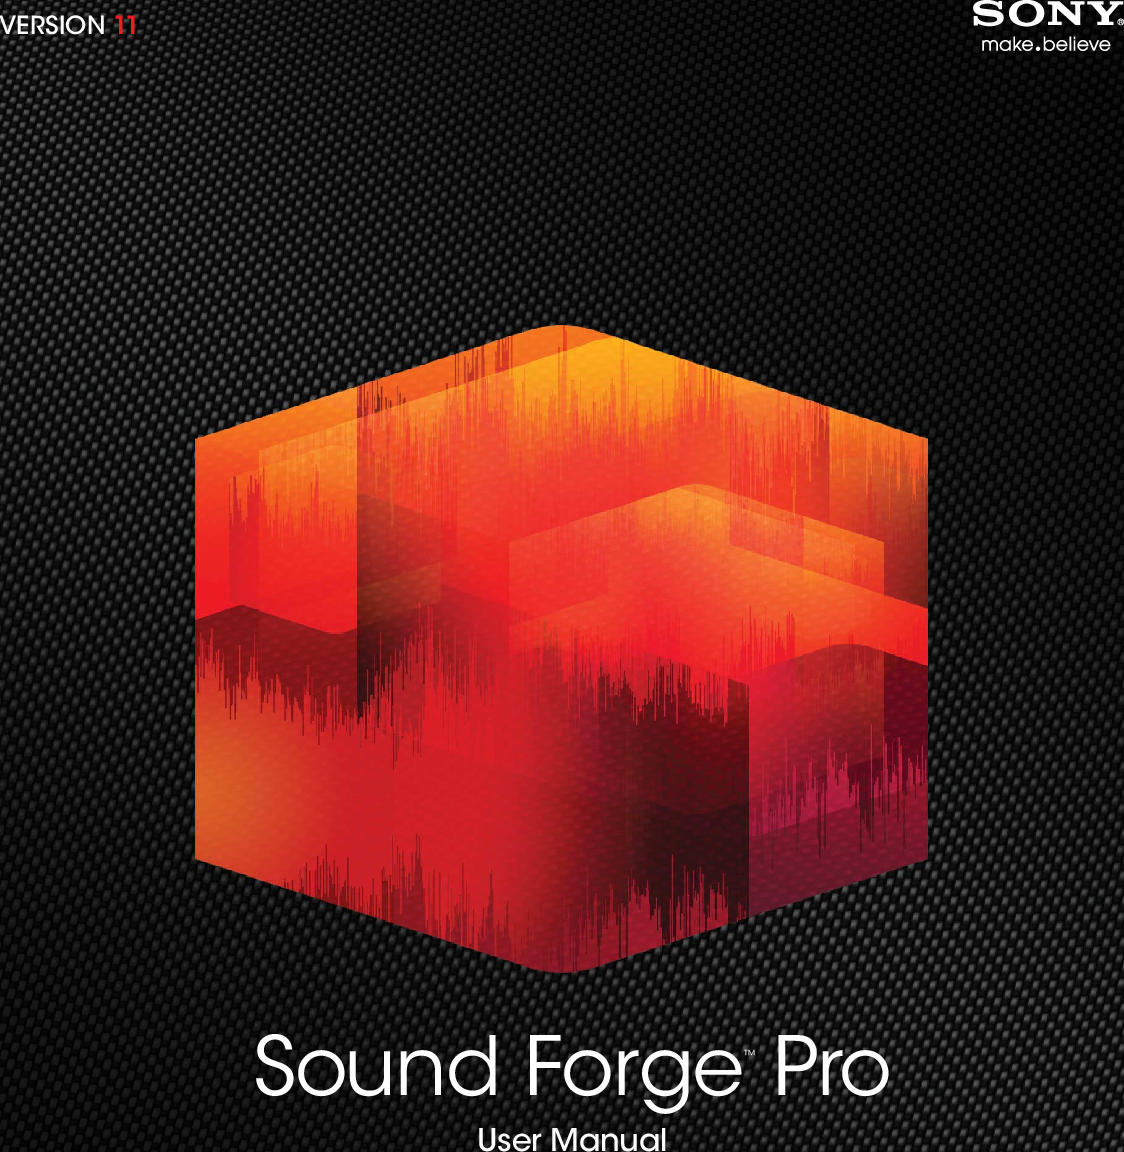 sound forge pro 11 free serial number list